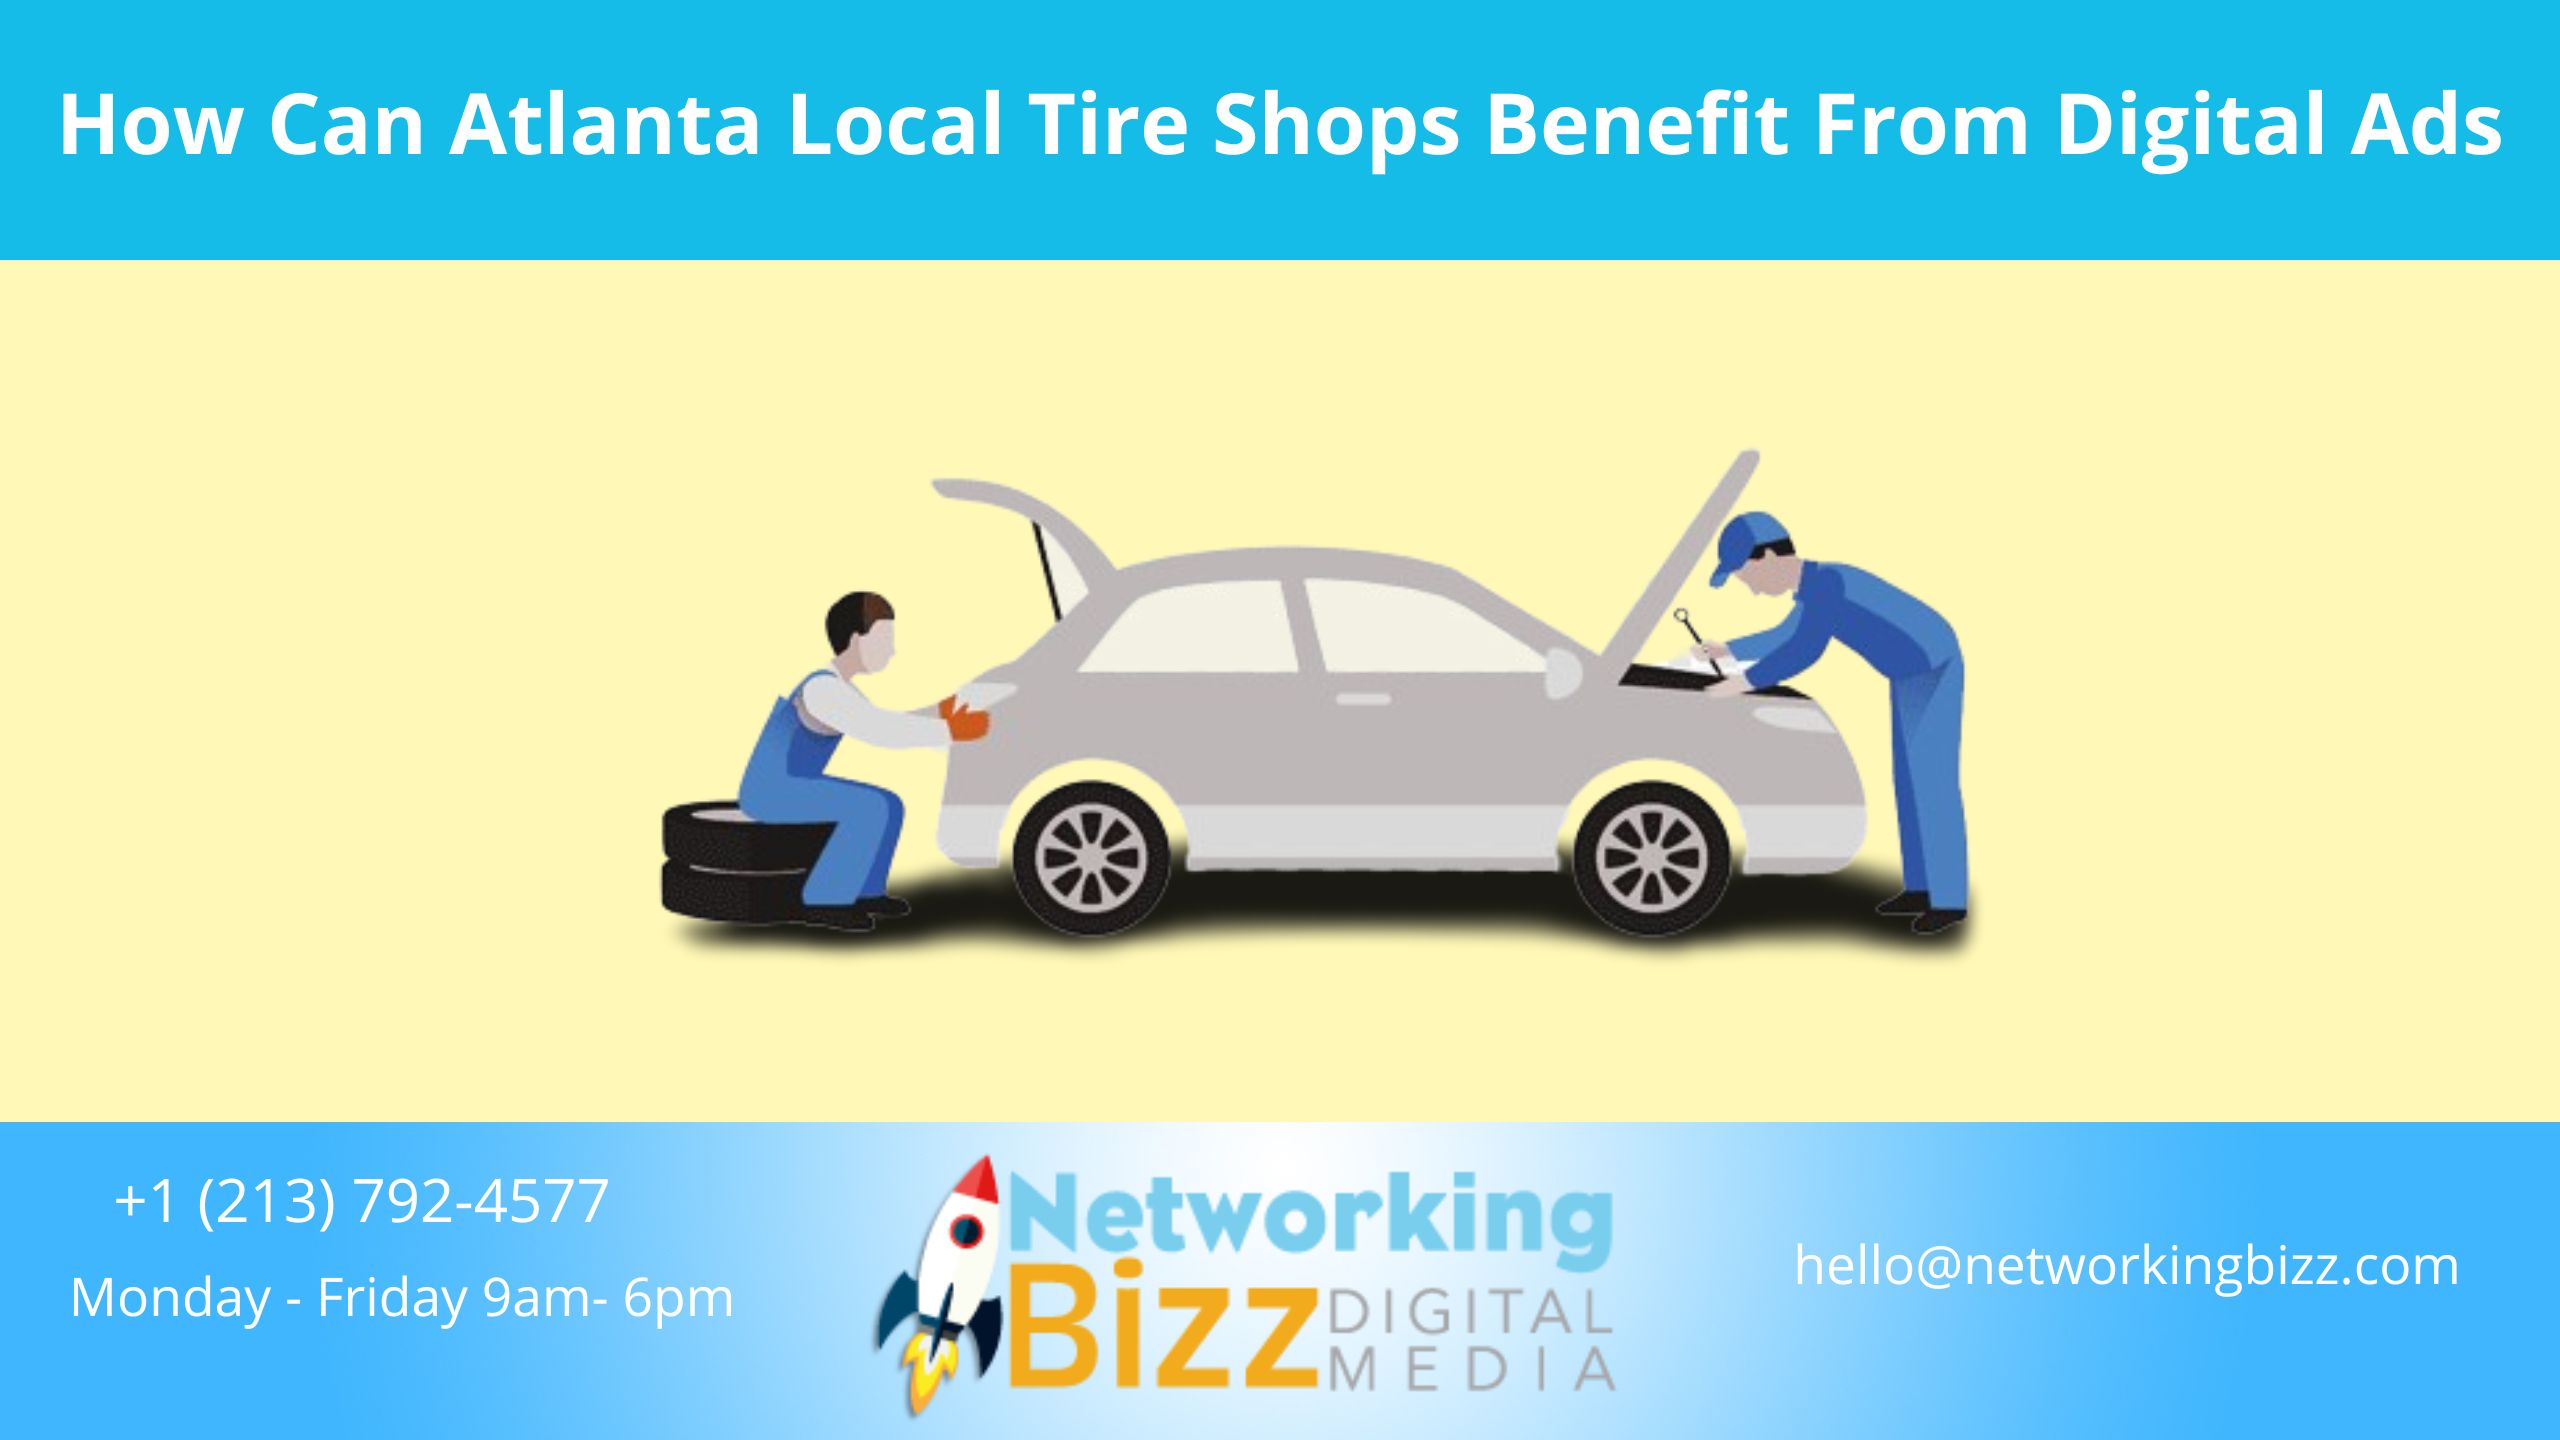 How Can Atlanta Local Tire Shops Benefit From Digital Ads